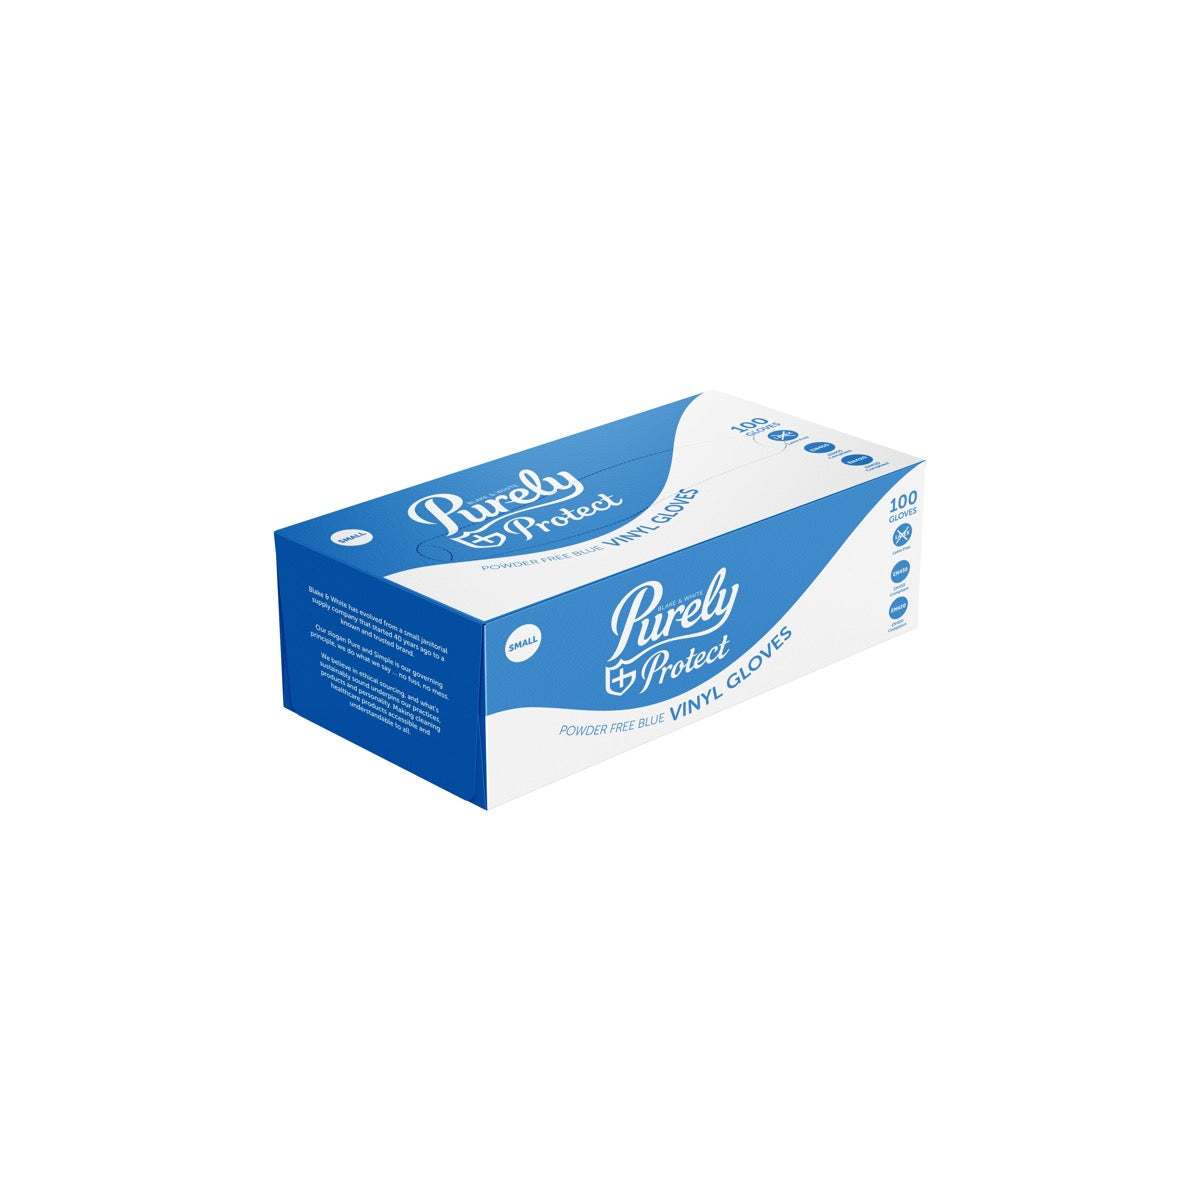 Purely Protect Nitrile Gloves Blue Medium Box of 100